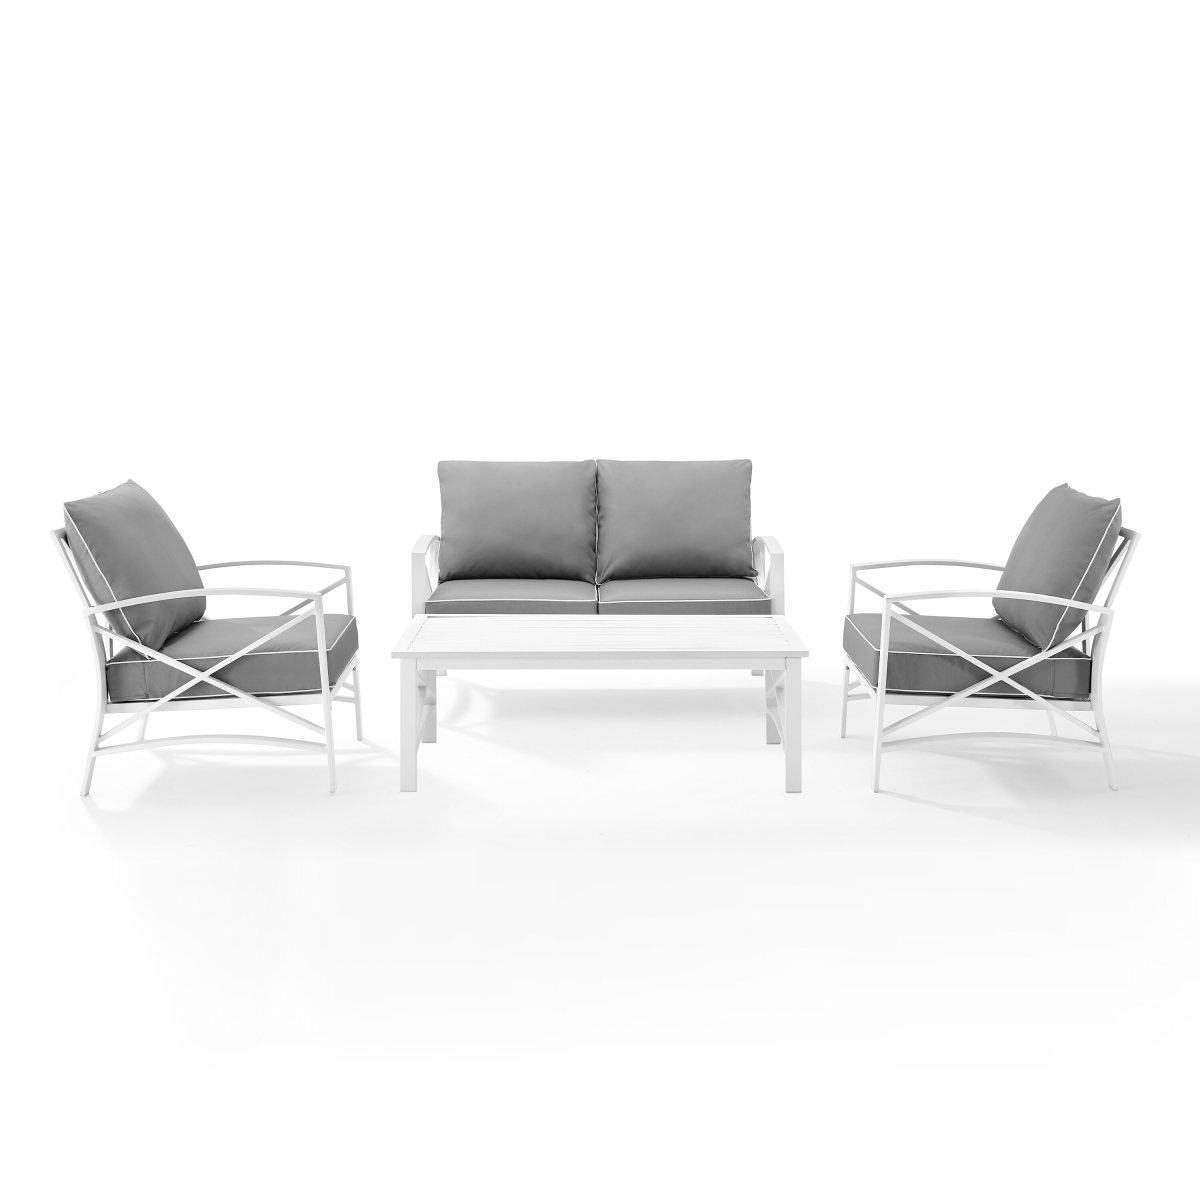 Ko60009wh-gy Kaplan 4-piece Outdoor Seating Set In White With Gray Cushions